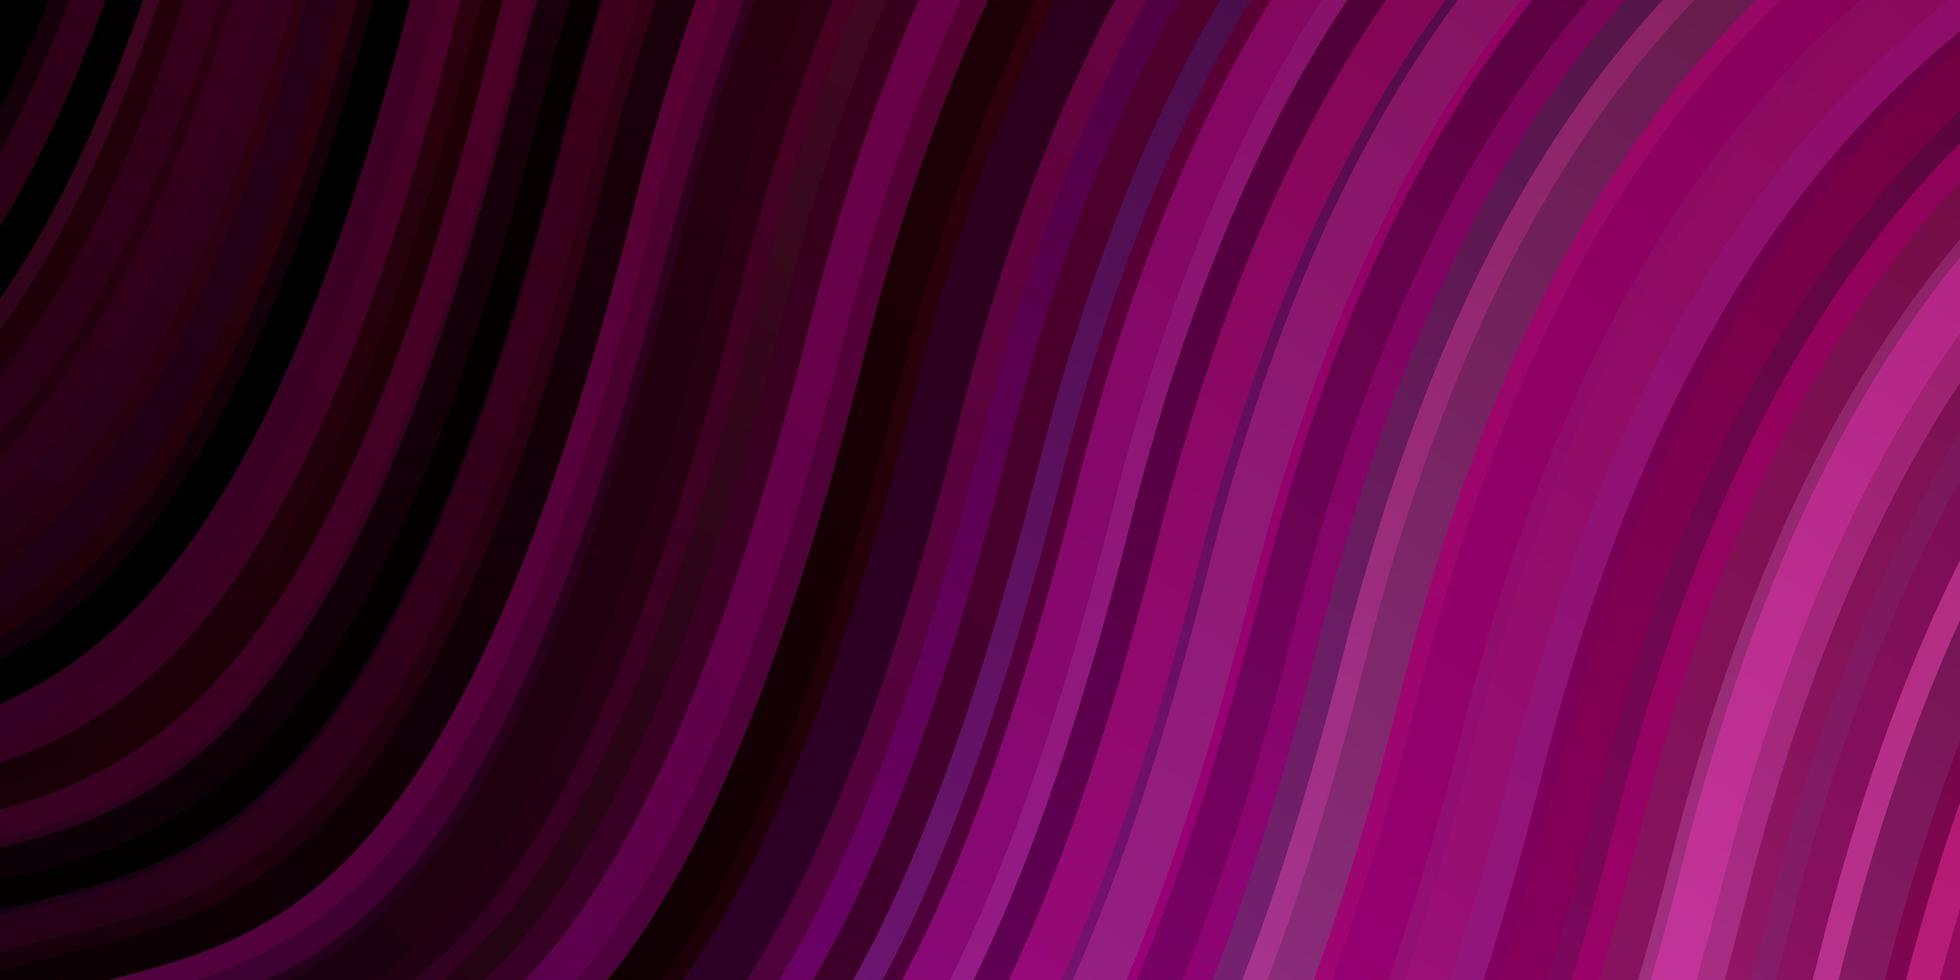 Dark Purple, Pink vector background with wry lines.